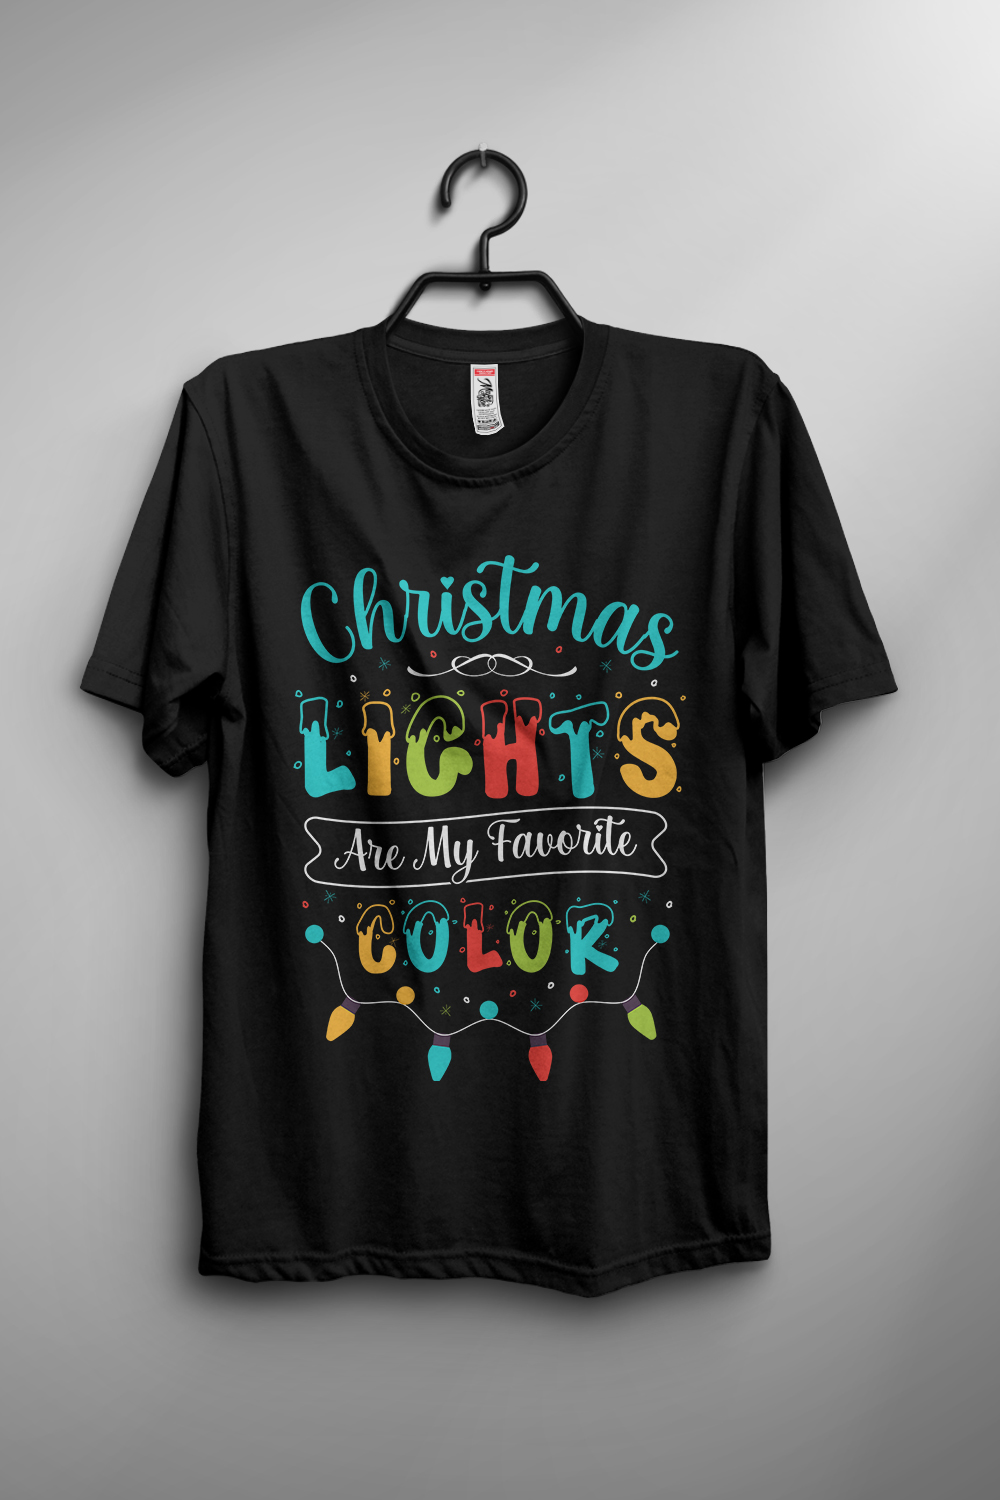 Christmas lights are my favorite color T-shirt design pinterest preview image.